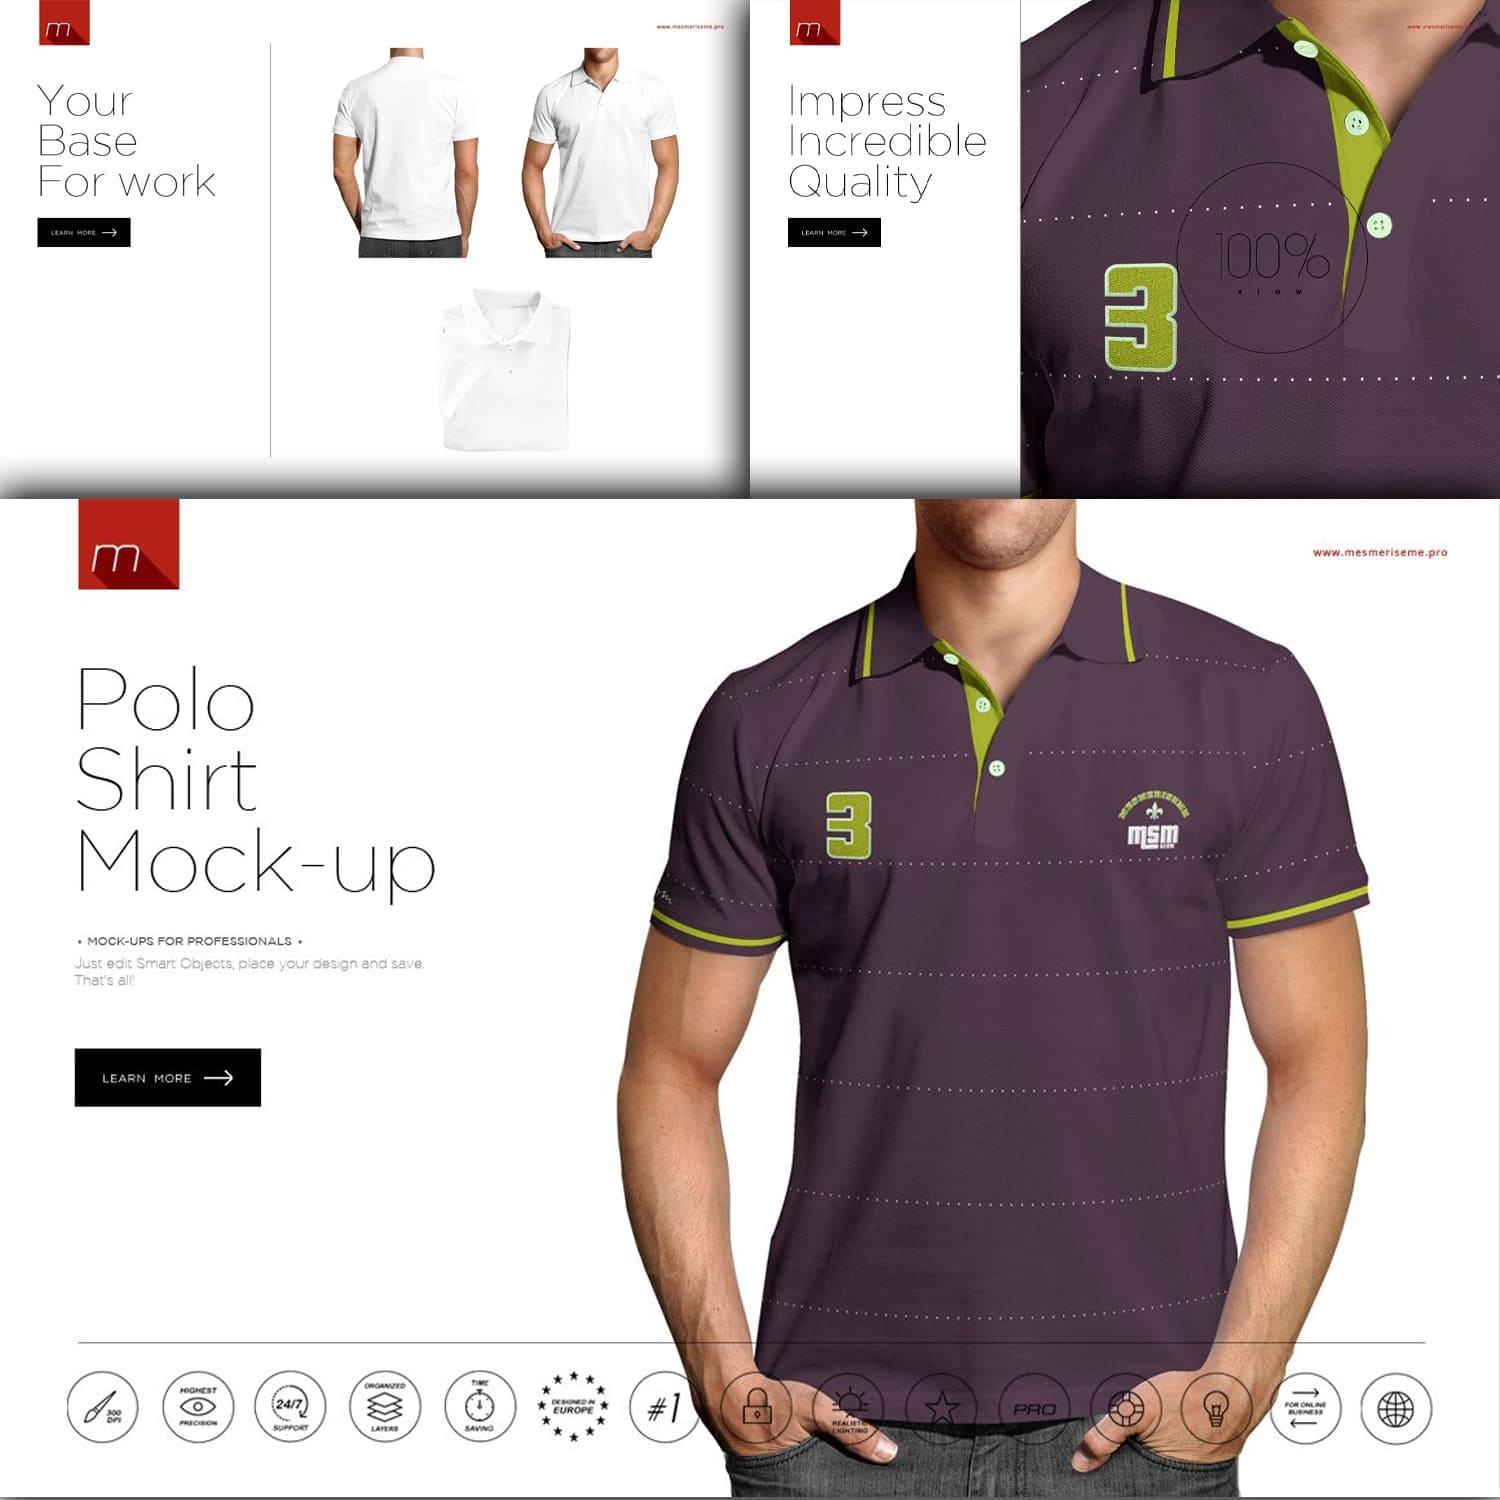 Polo 5x mockup is the basis for work.